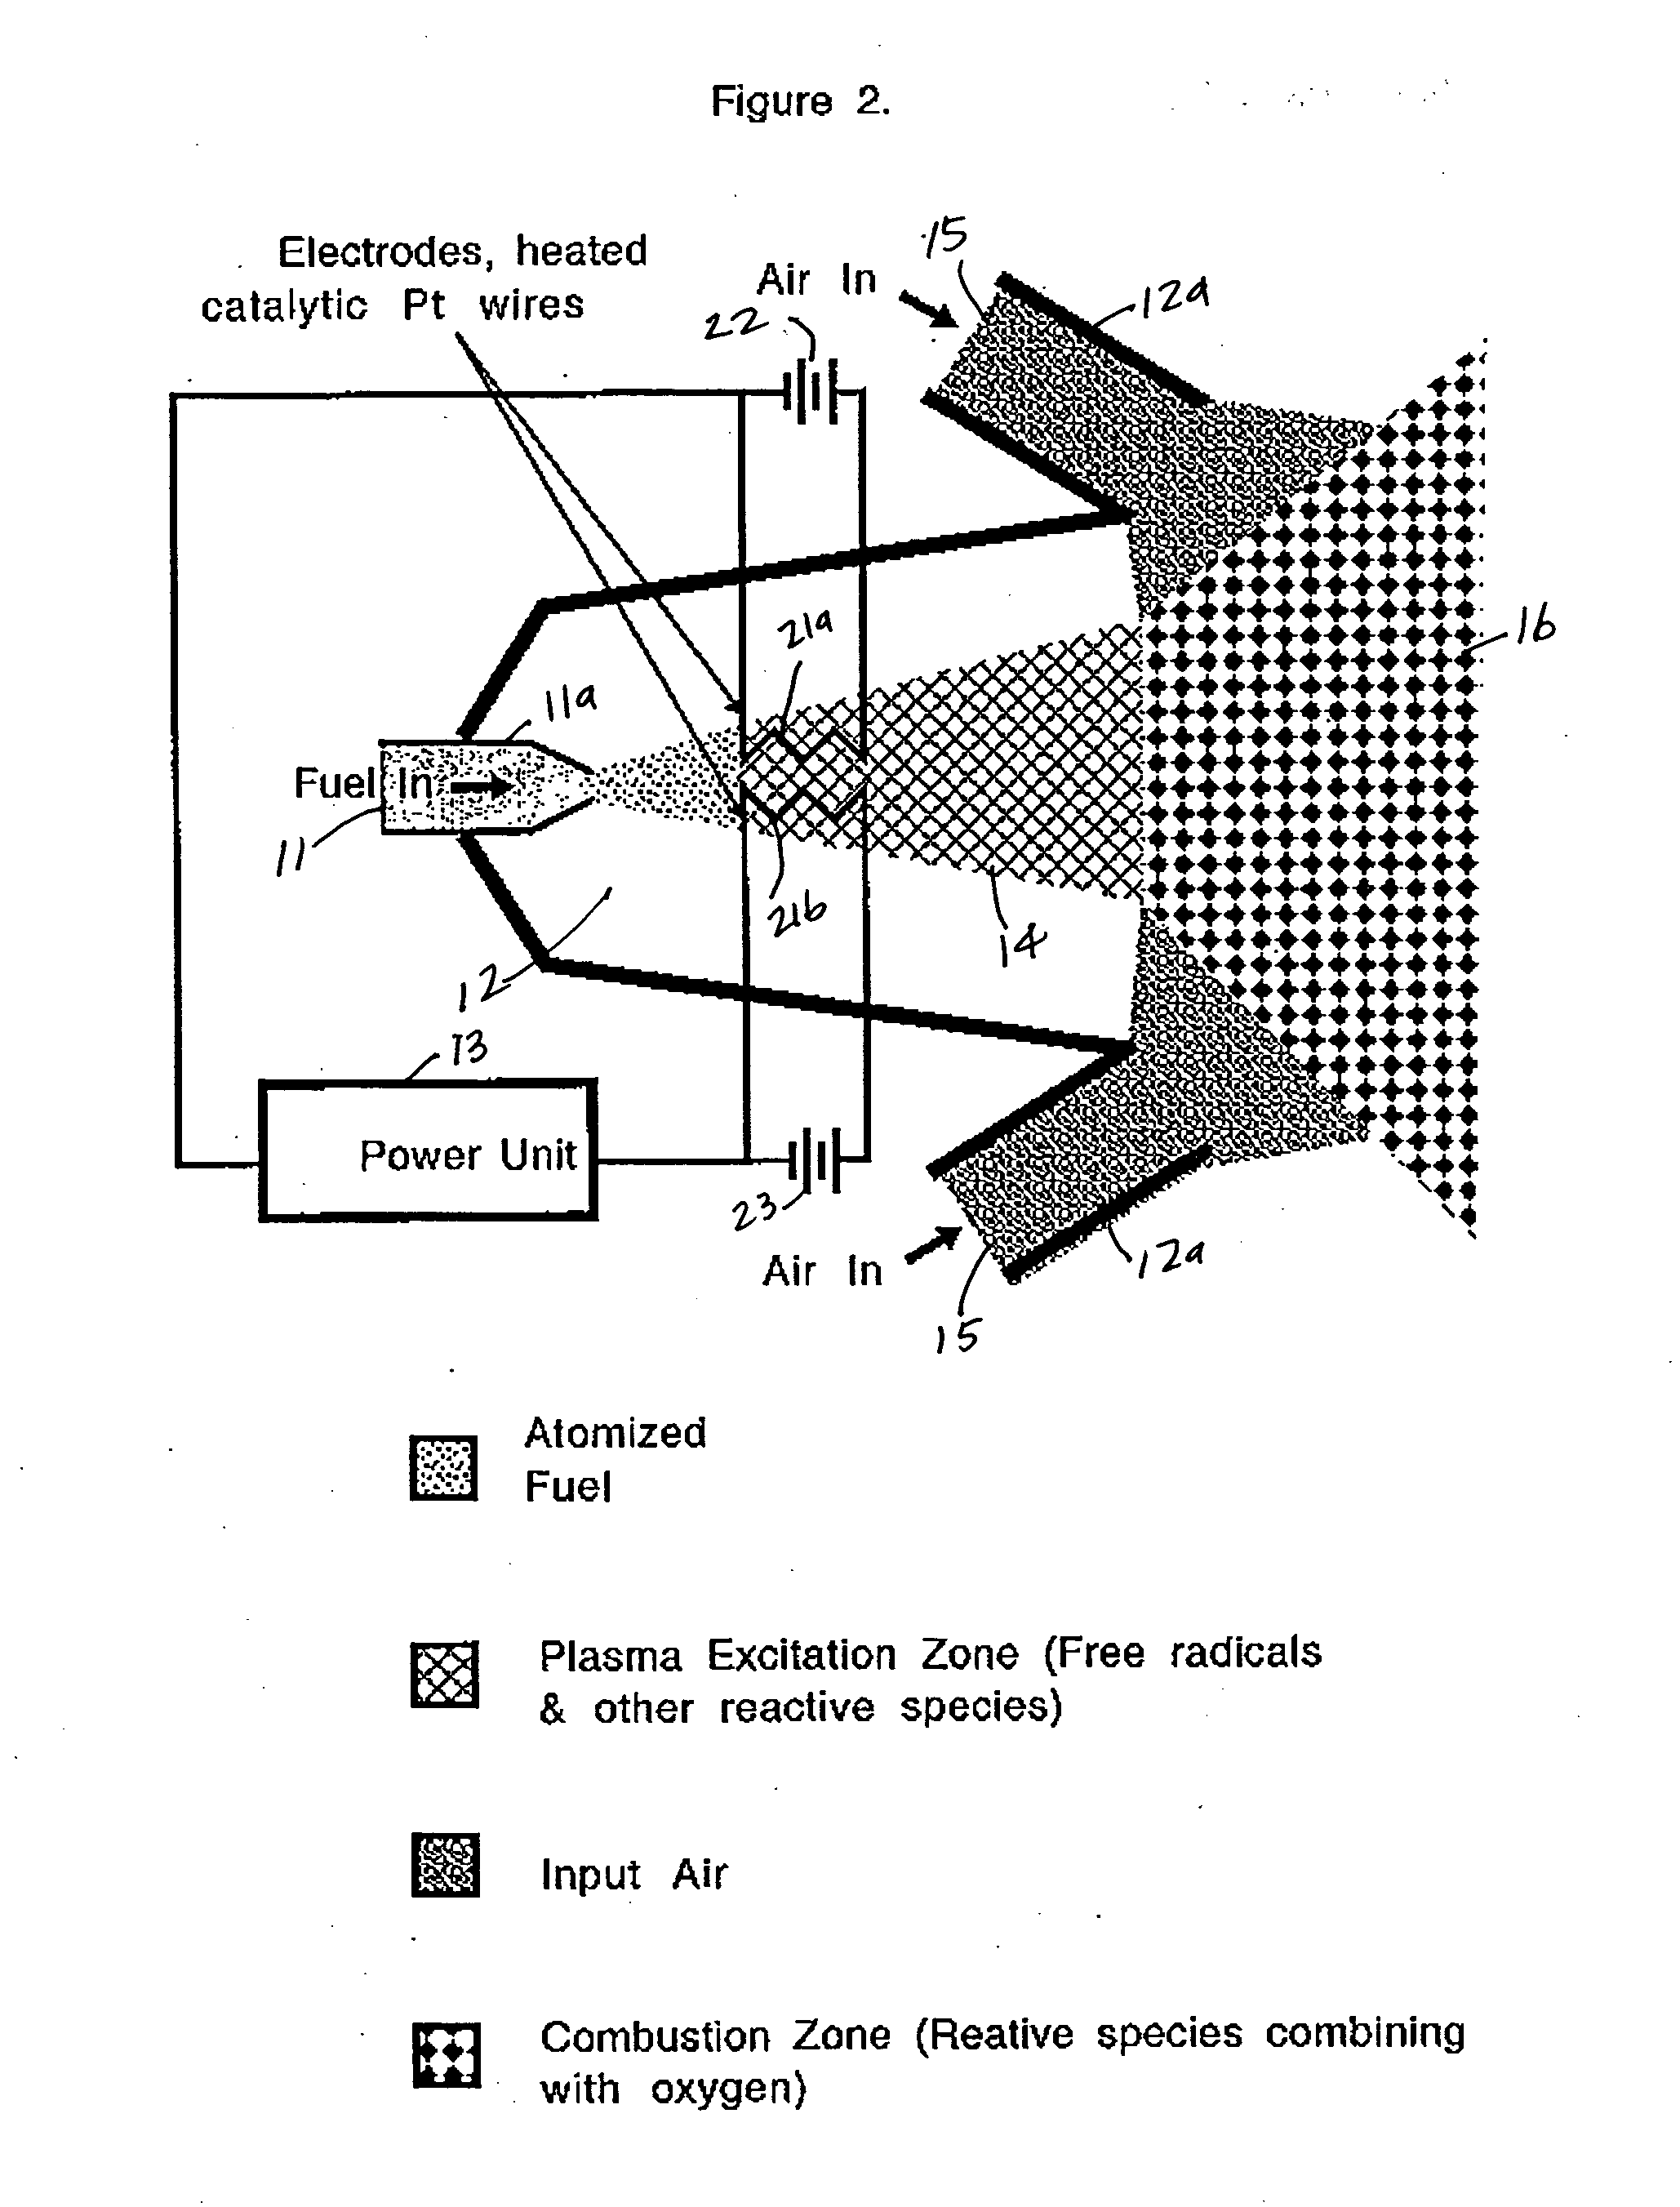 Plasma catalytic fuel injector for enhanced combustion